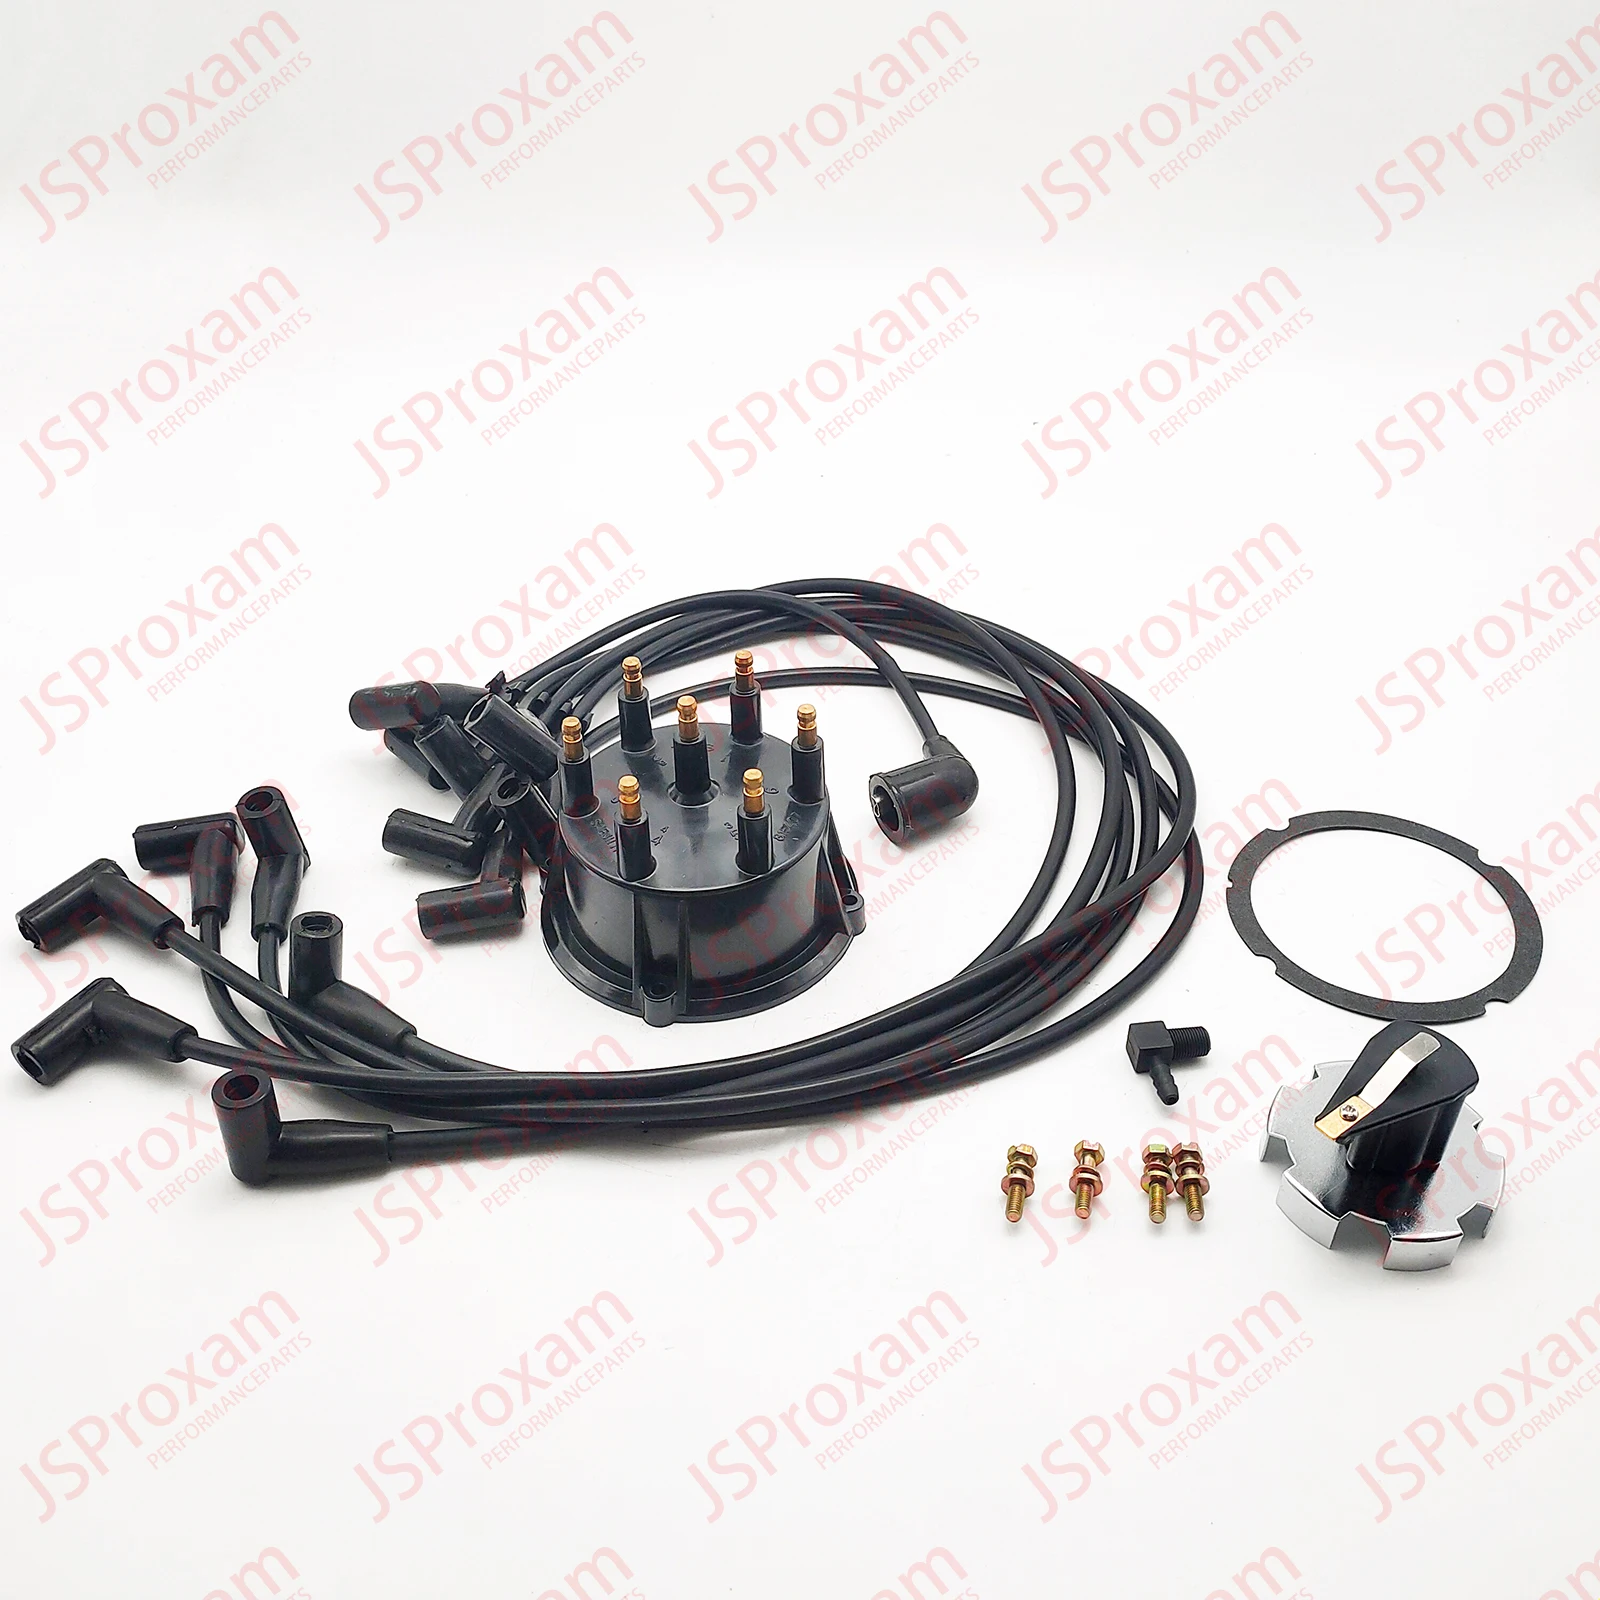 84-816761q16-816761q16-replaces-fits-for-mercruiser-815407q5-thunderbolt-v6-hei-marine-tuning-kit-with-wire